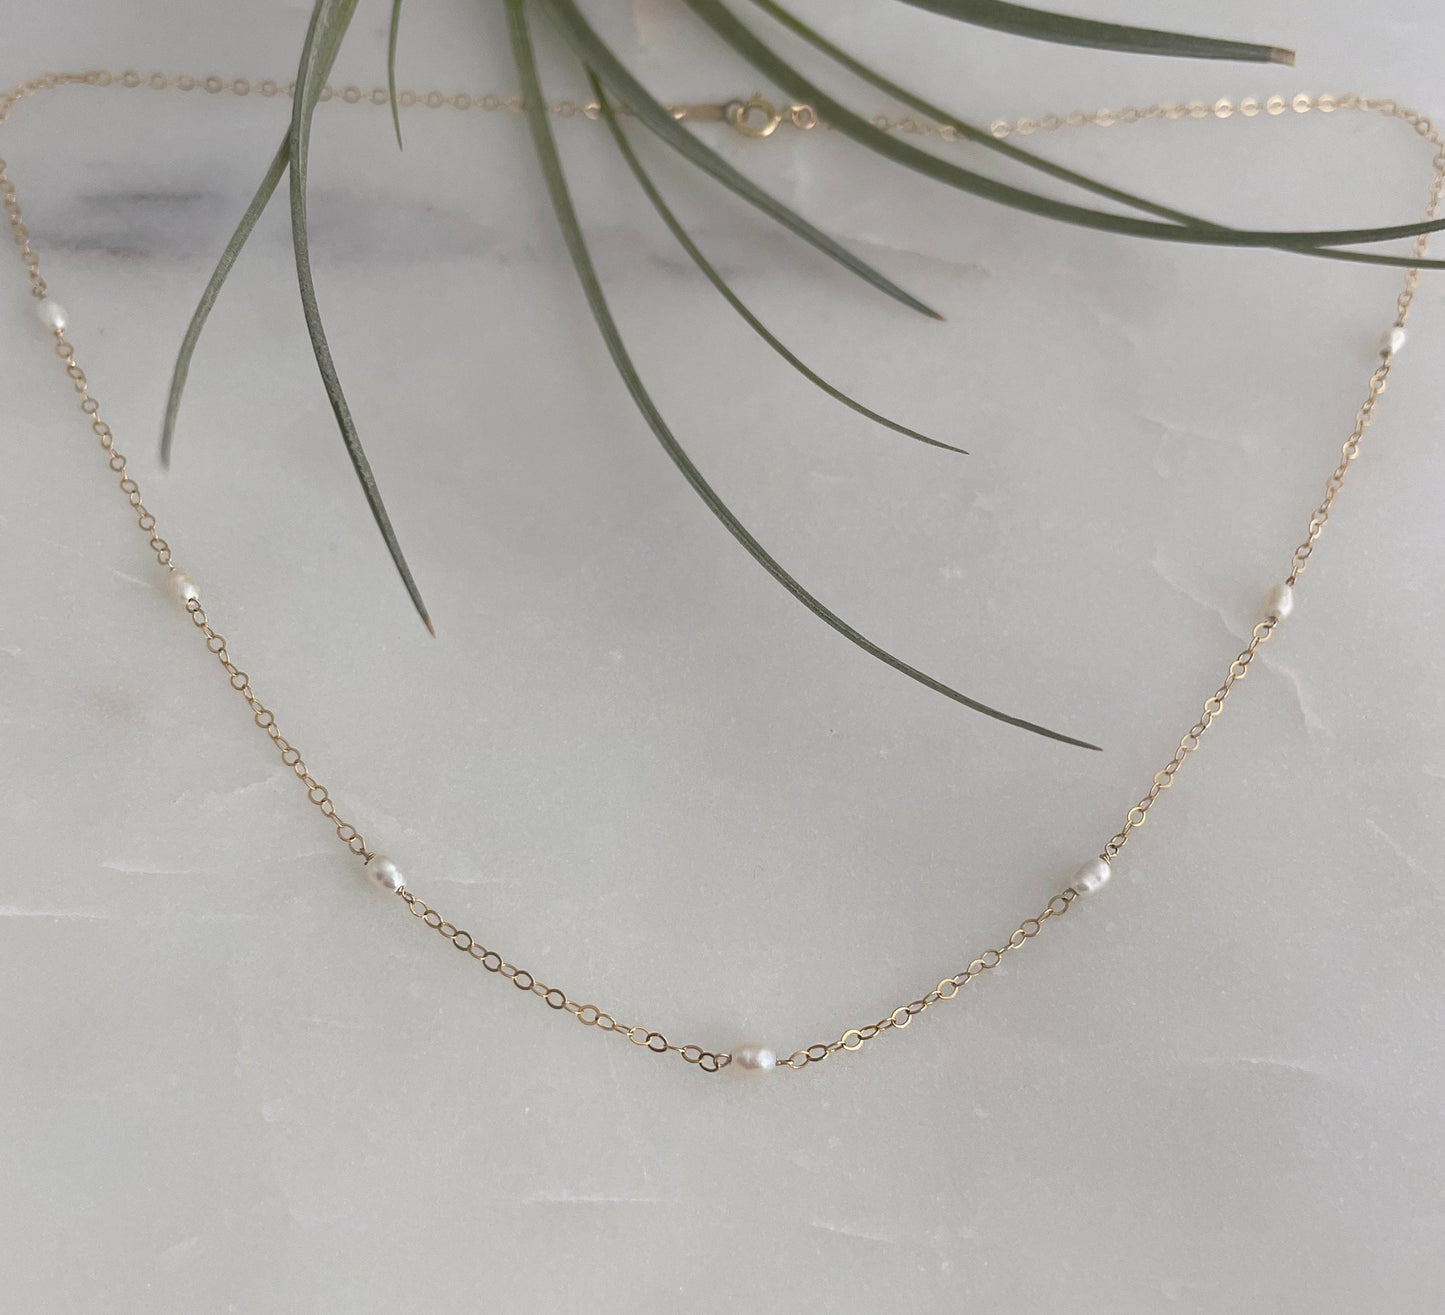 Tiny Pearl Necklace - 2-3mm White Freshwater Rice Pearl, 14k Gold Filled Chain